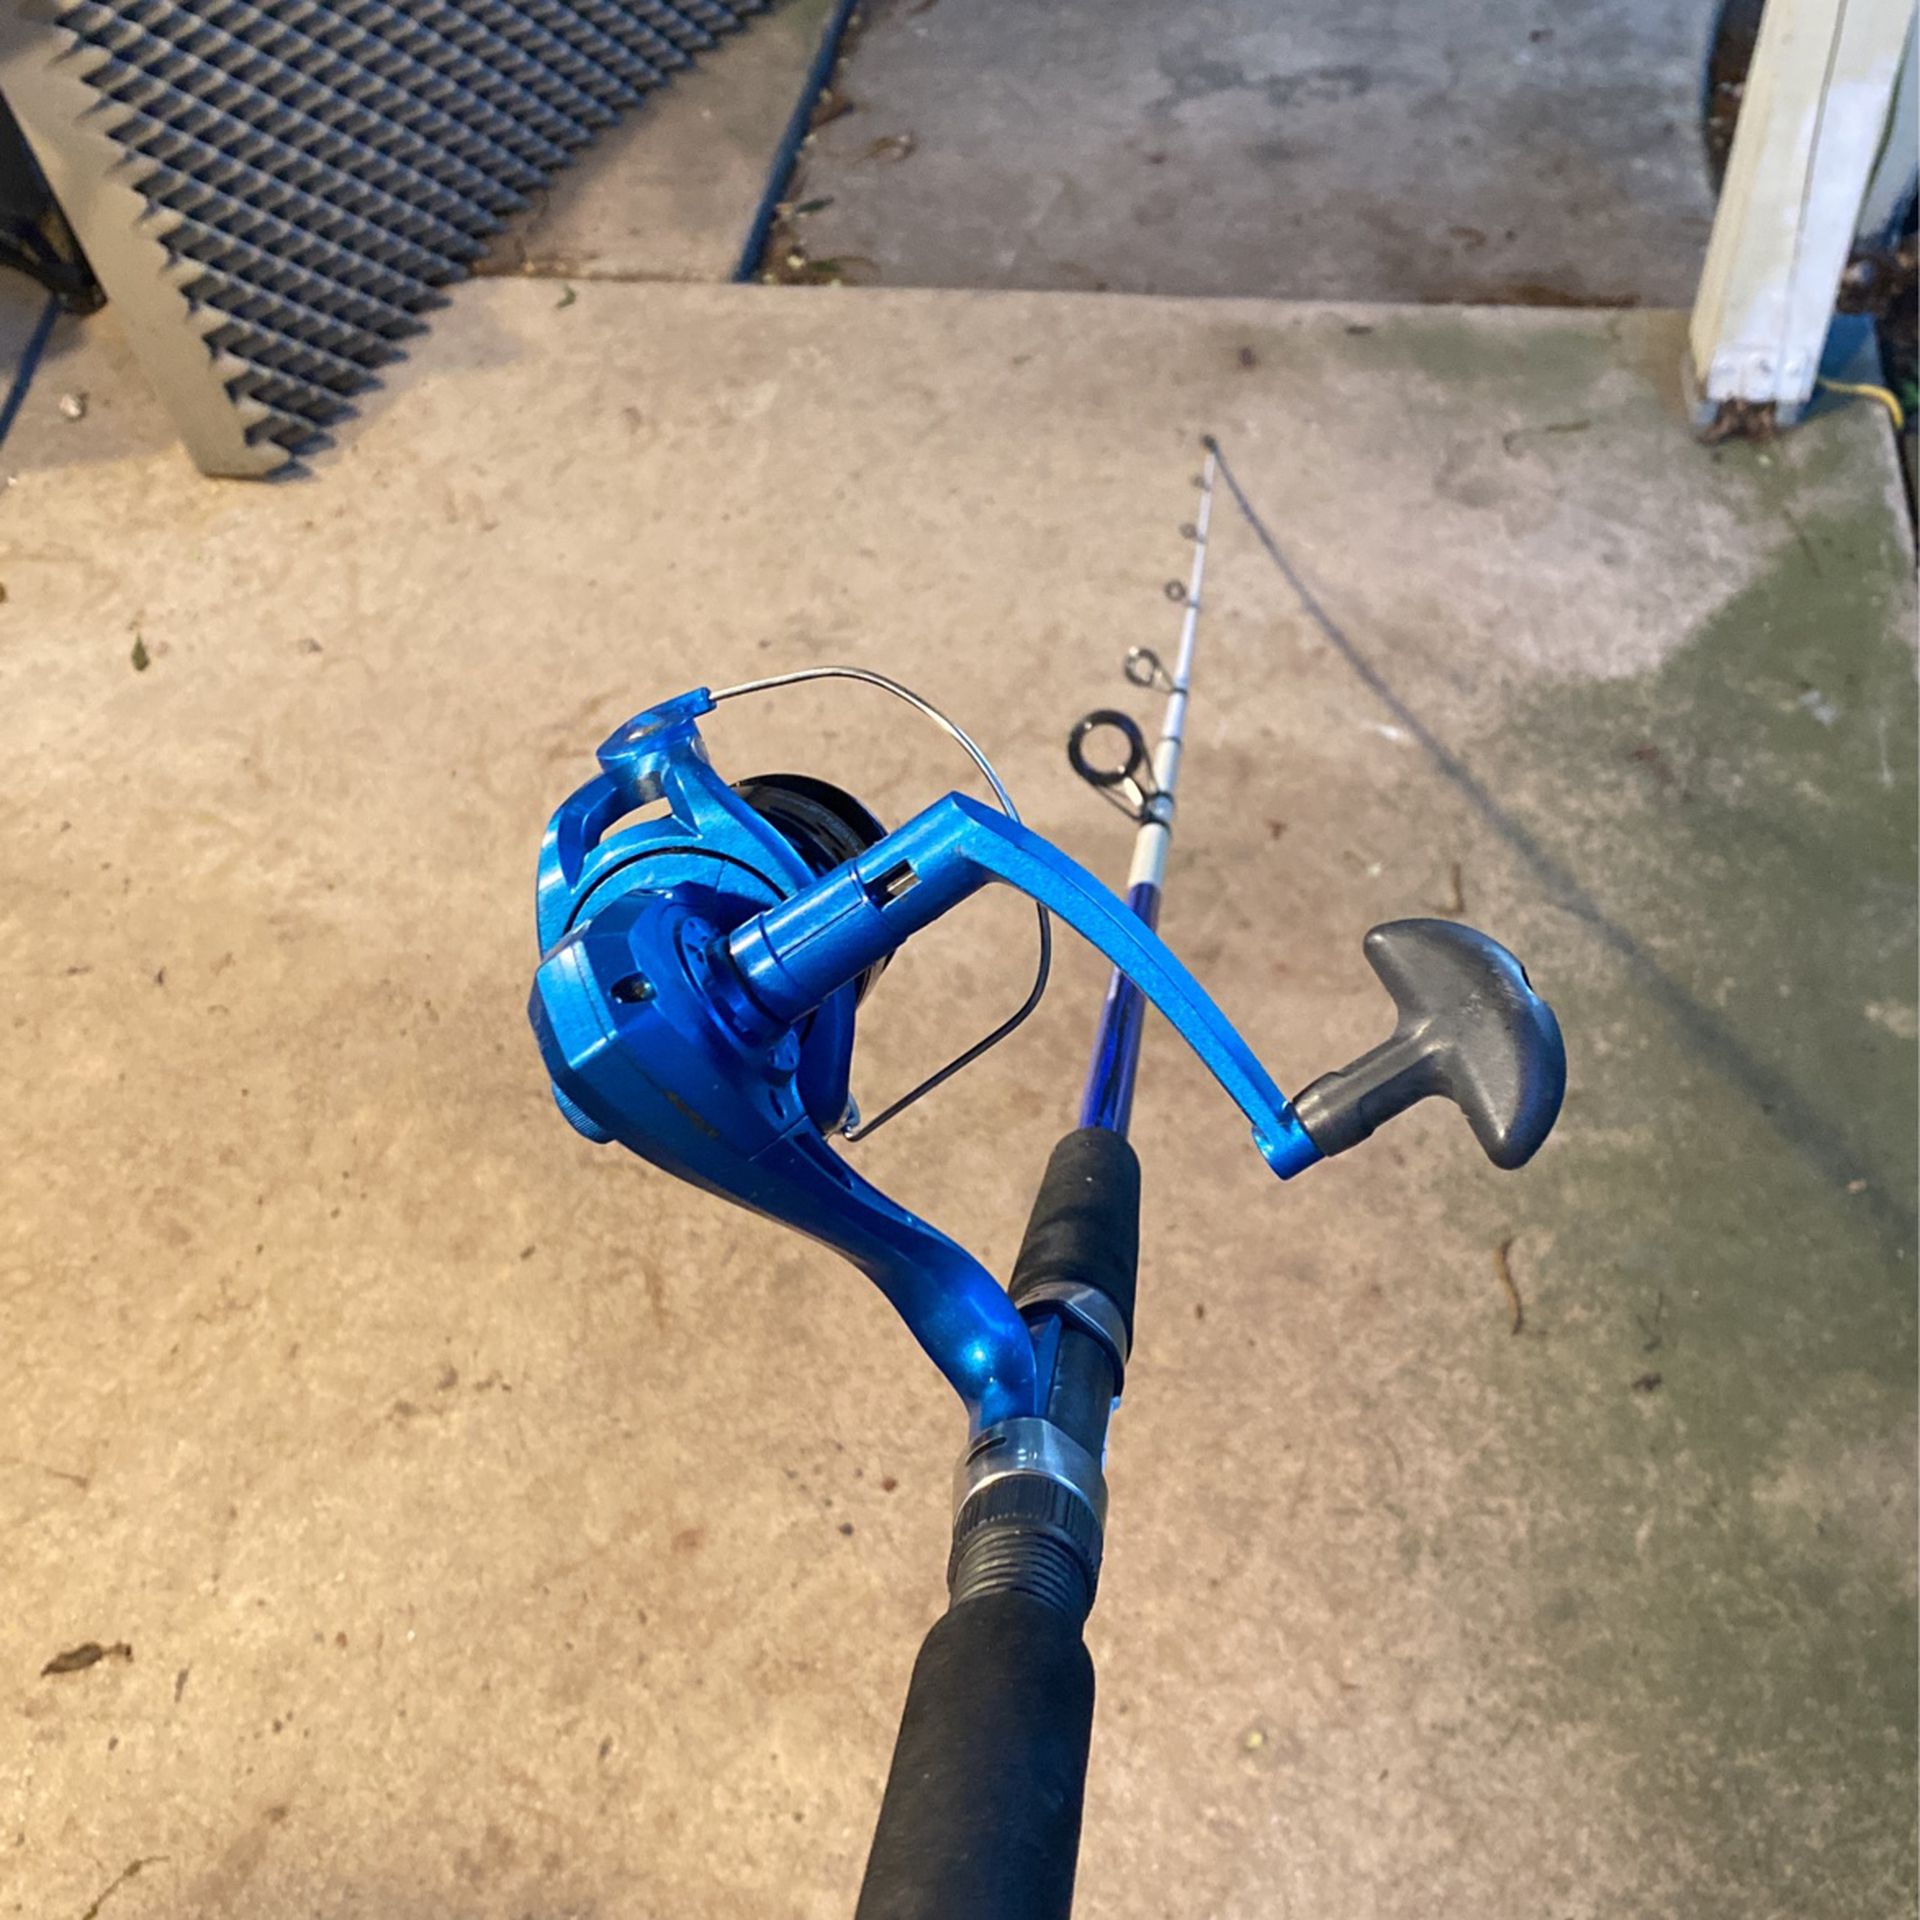 Shakespeare Tiger, 7”, Medium Weight Fishing Rod for Sale in San